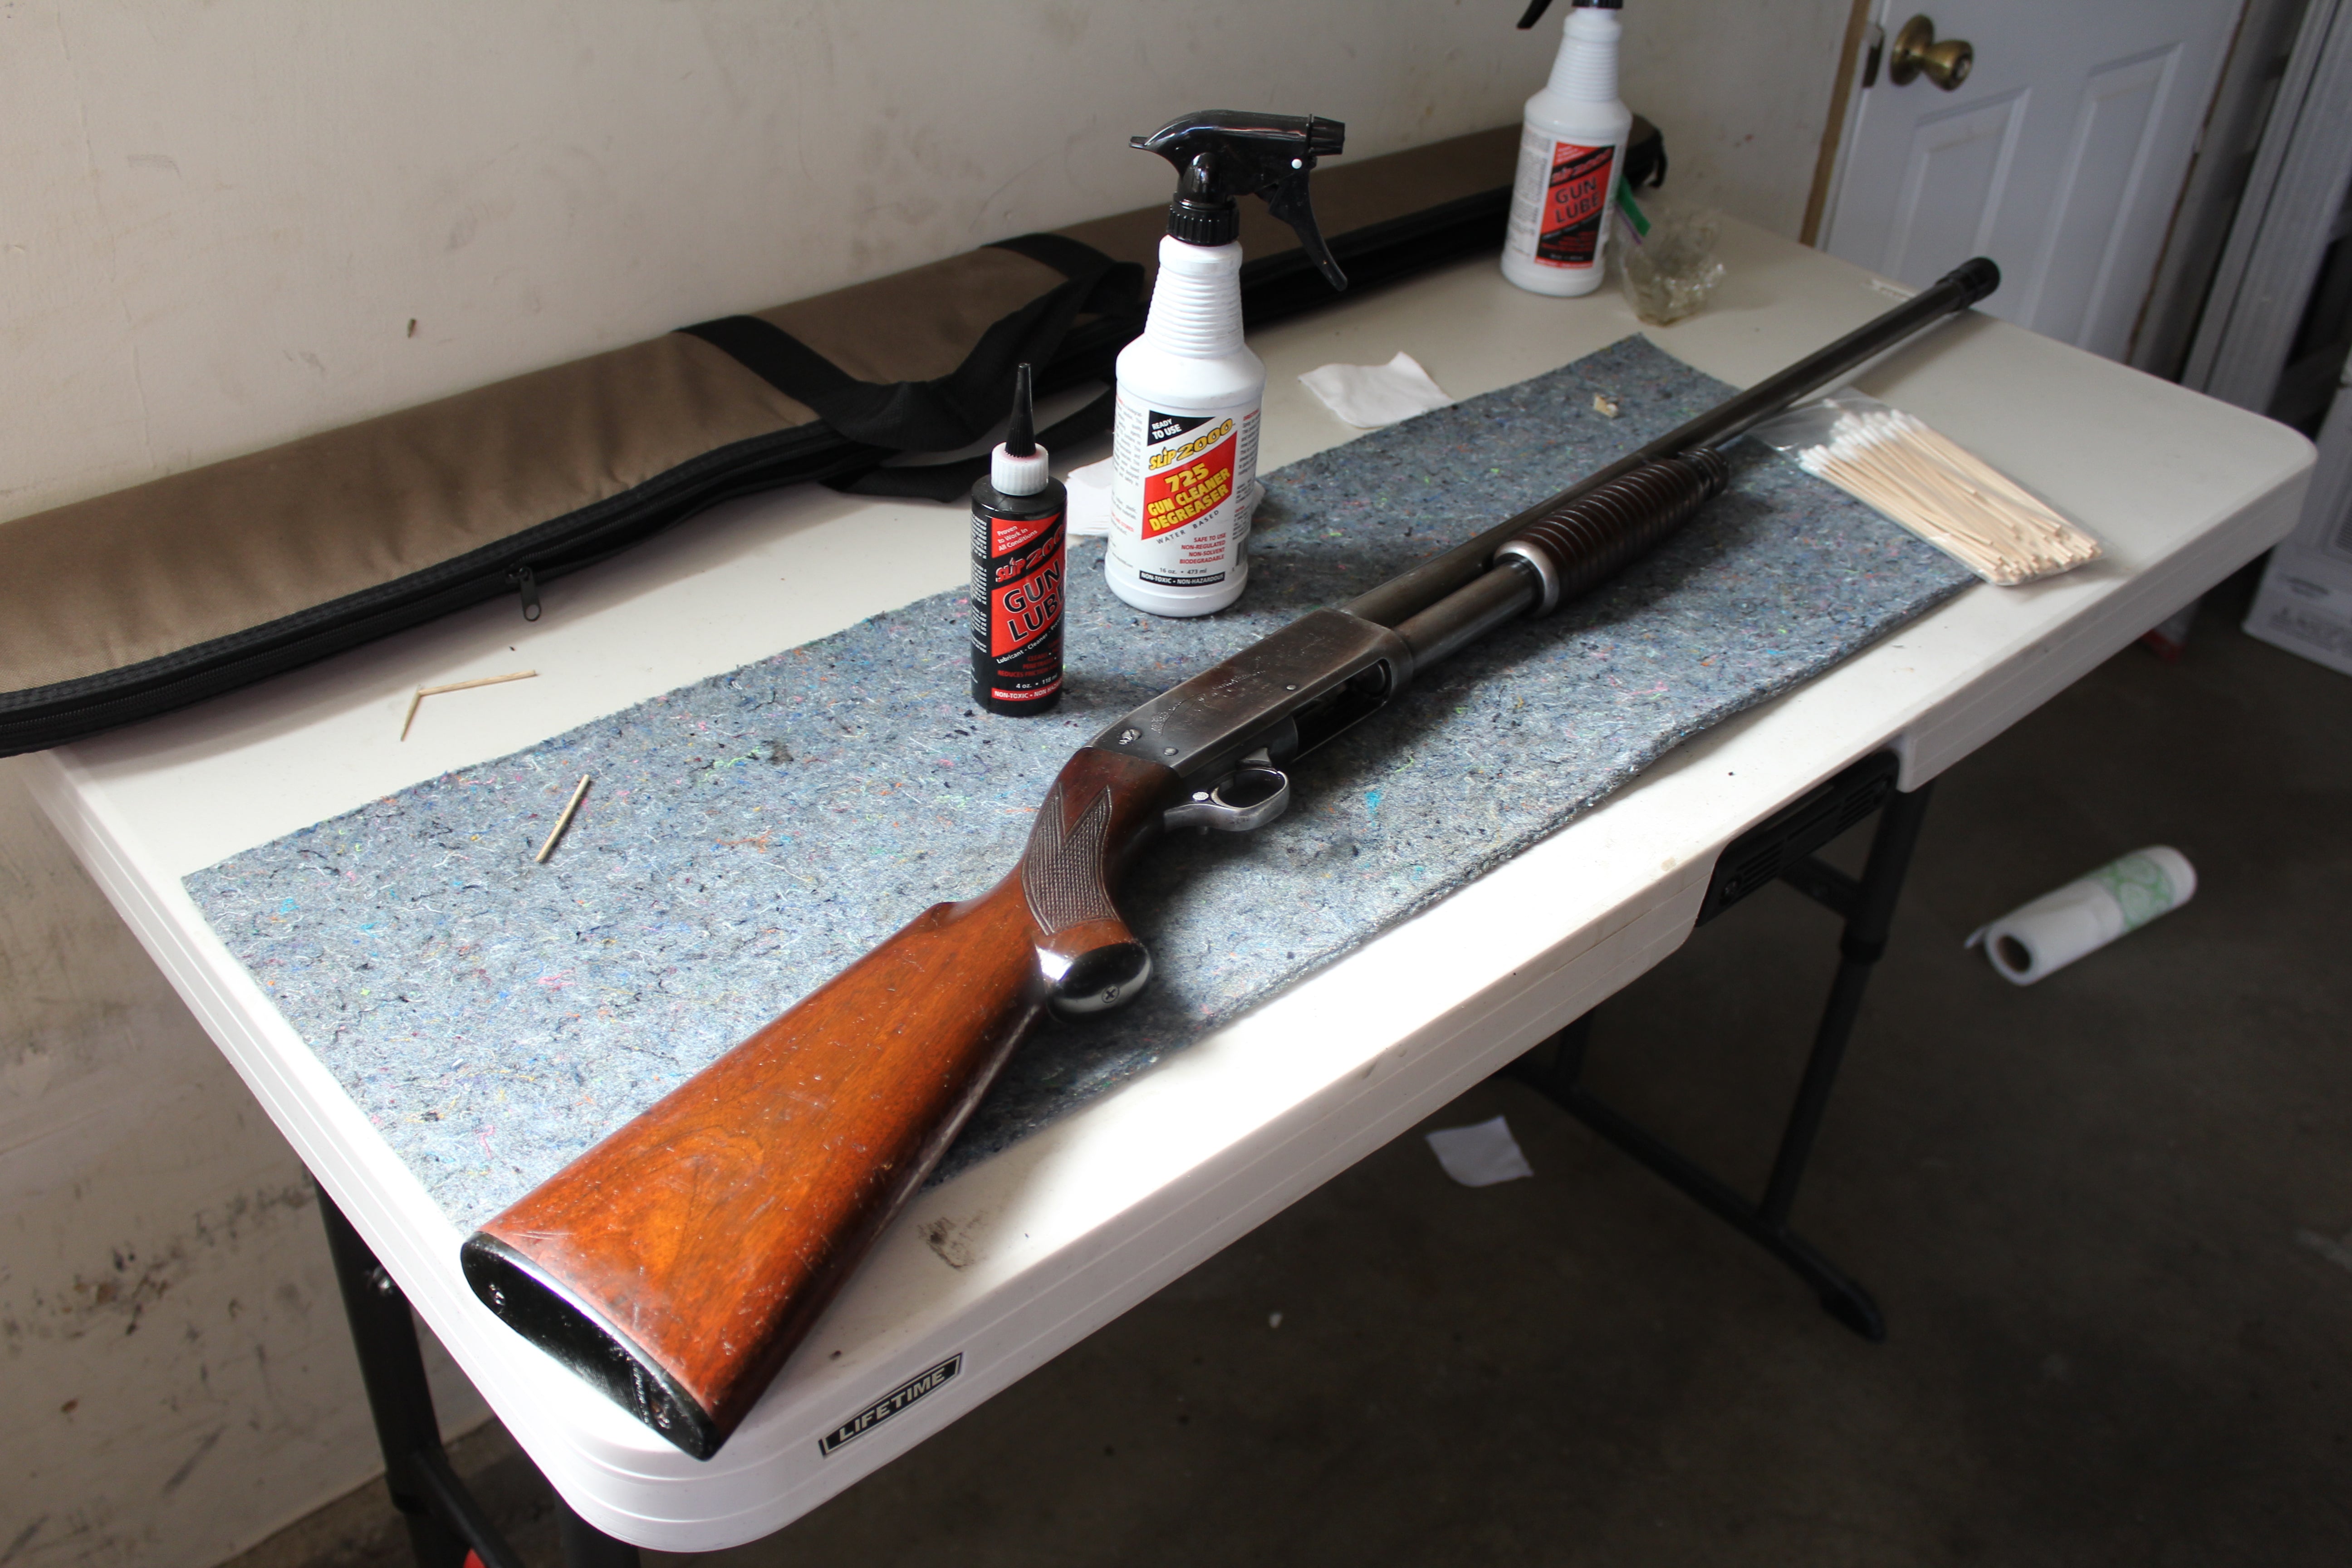 Shotgun Blast From the Past: Cleaning an Ithaca Model 37 with 725 cleaner